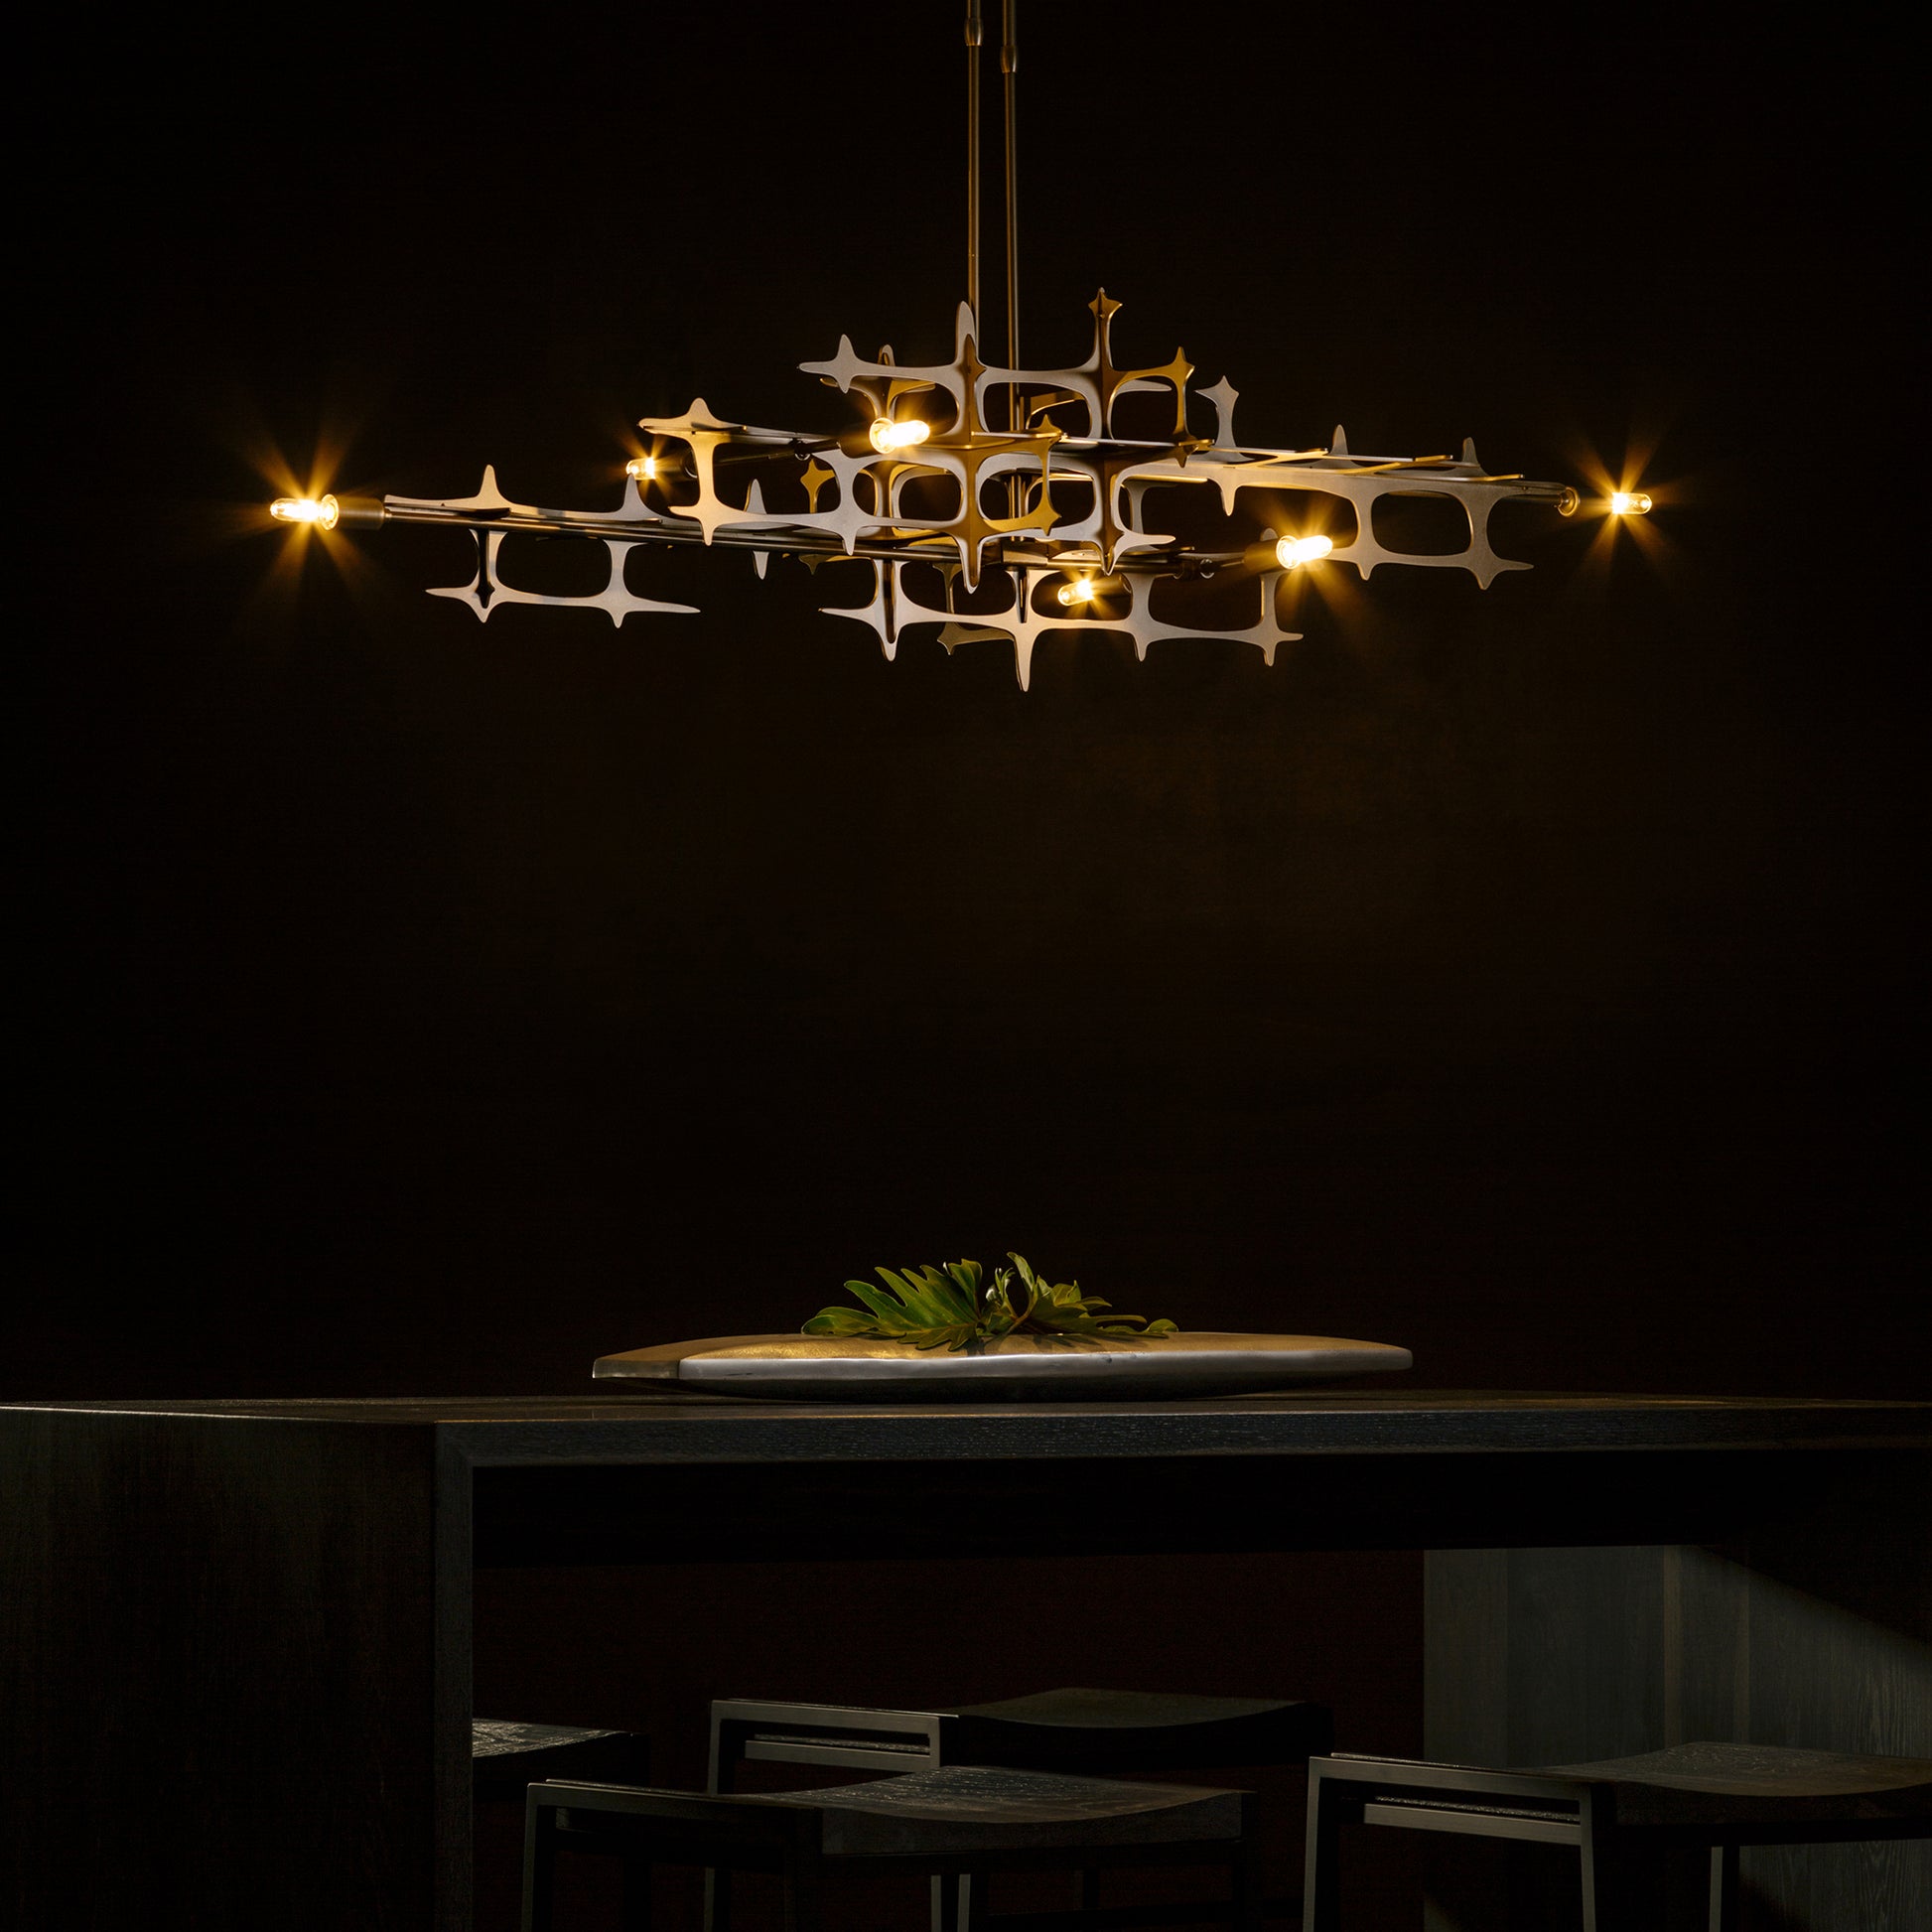 An industrial design Grid Pendant chandelier by Hubbardton Forge gracefully hangs over a table in a dark room.